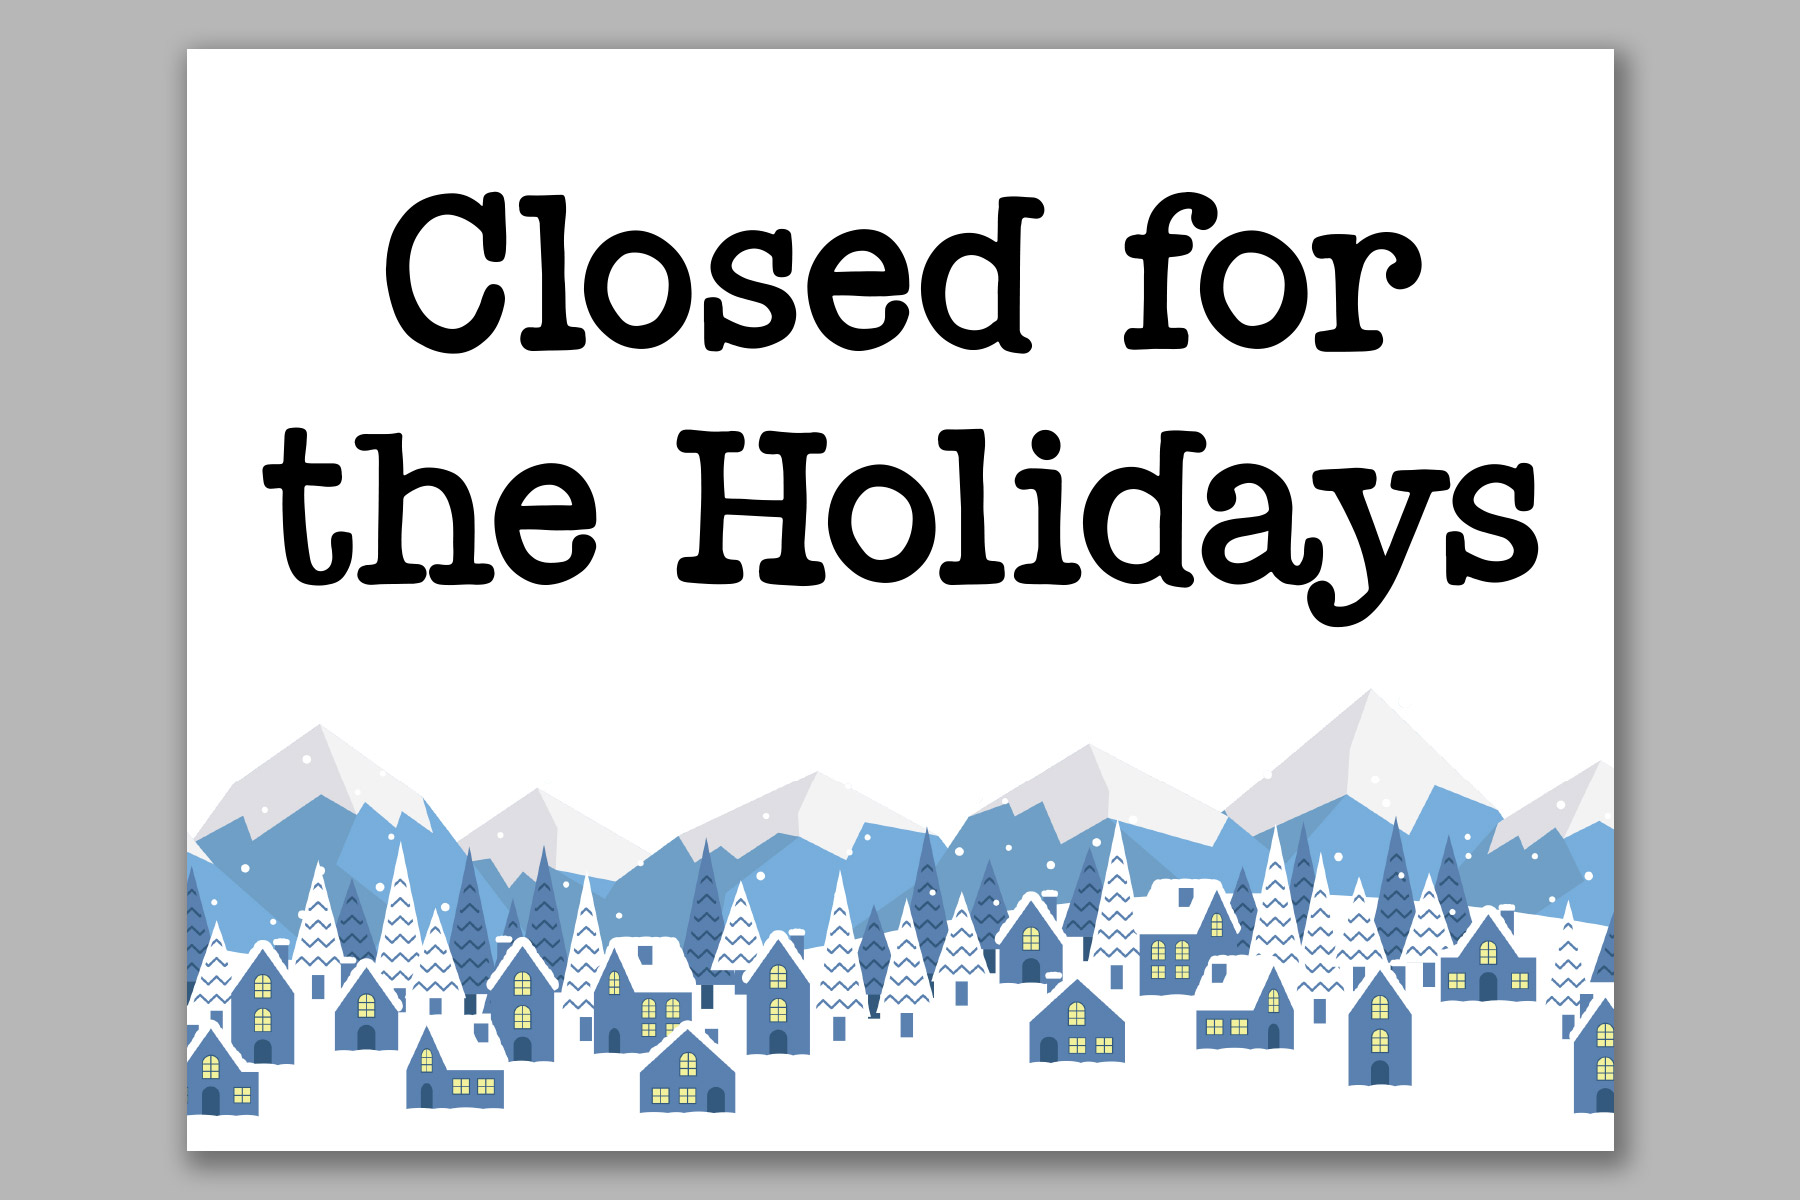 This image shows one of the free printable closed for Christmas sign templates. It says closed for the holidays.